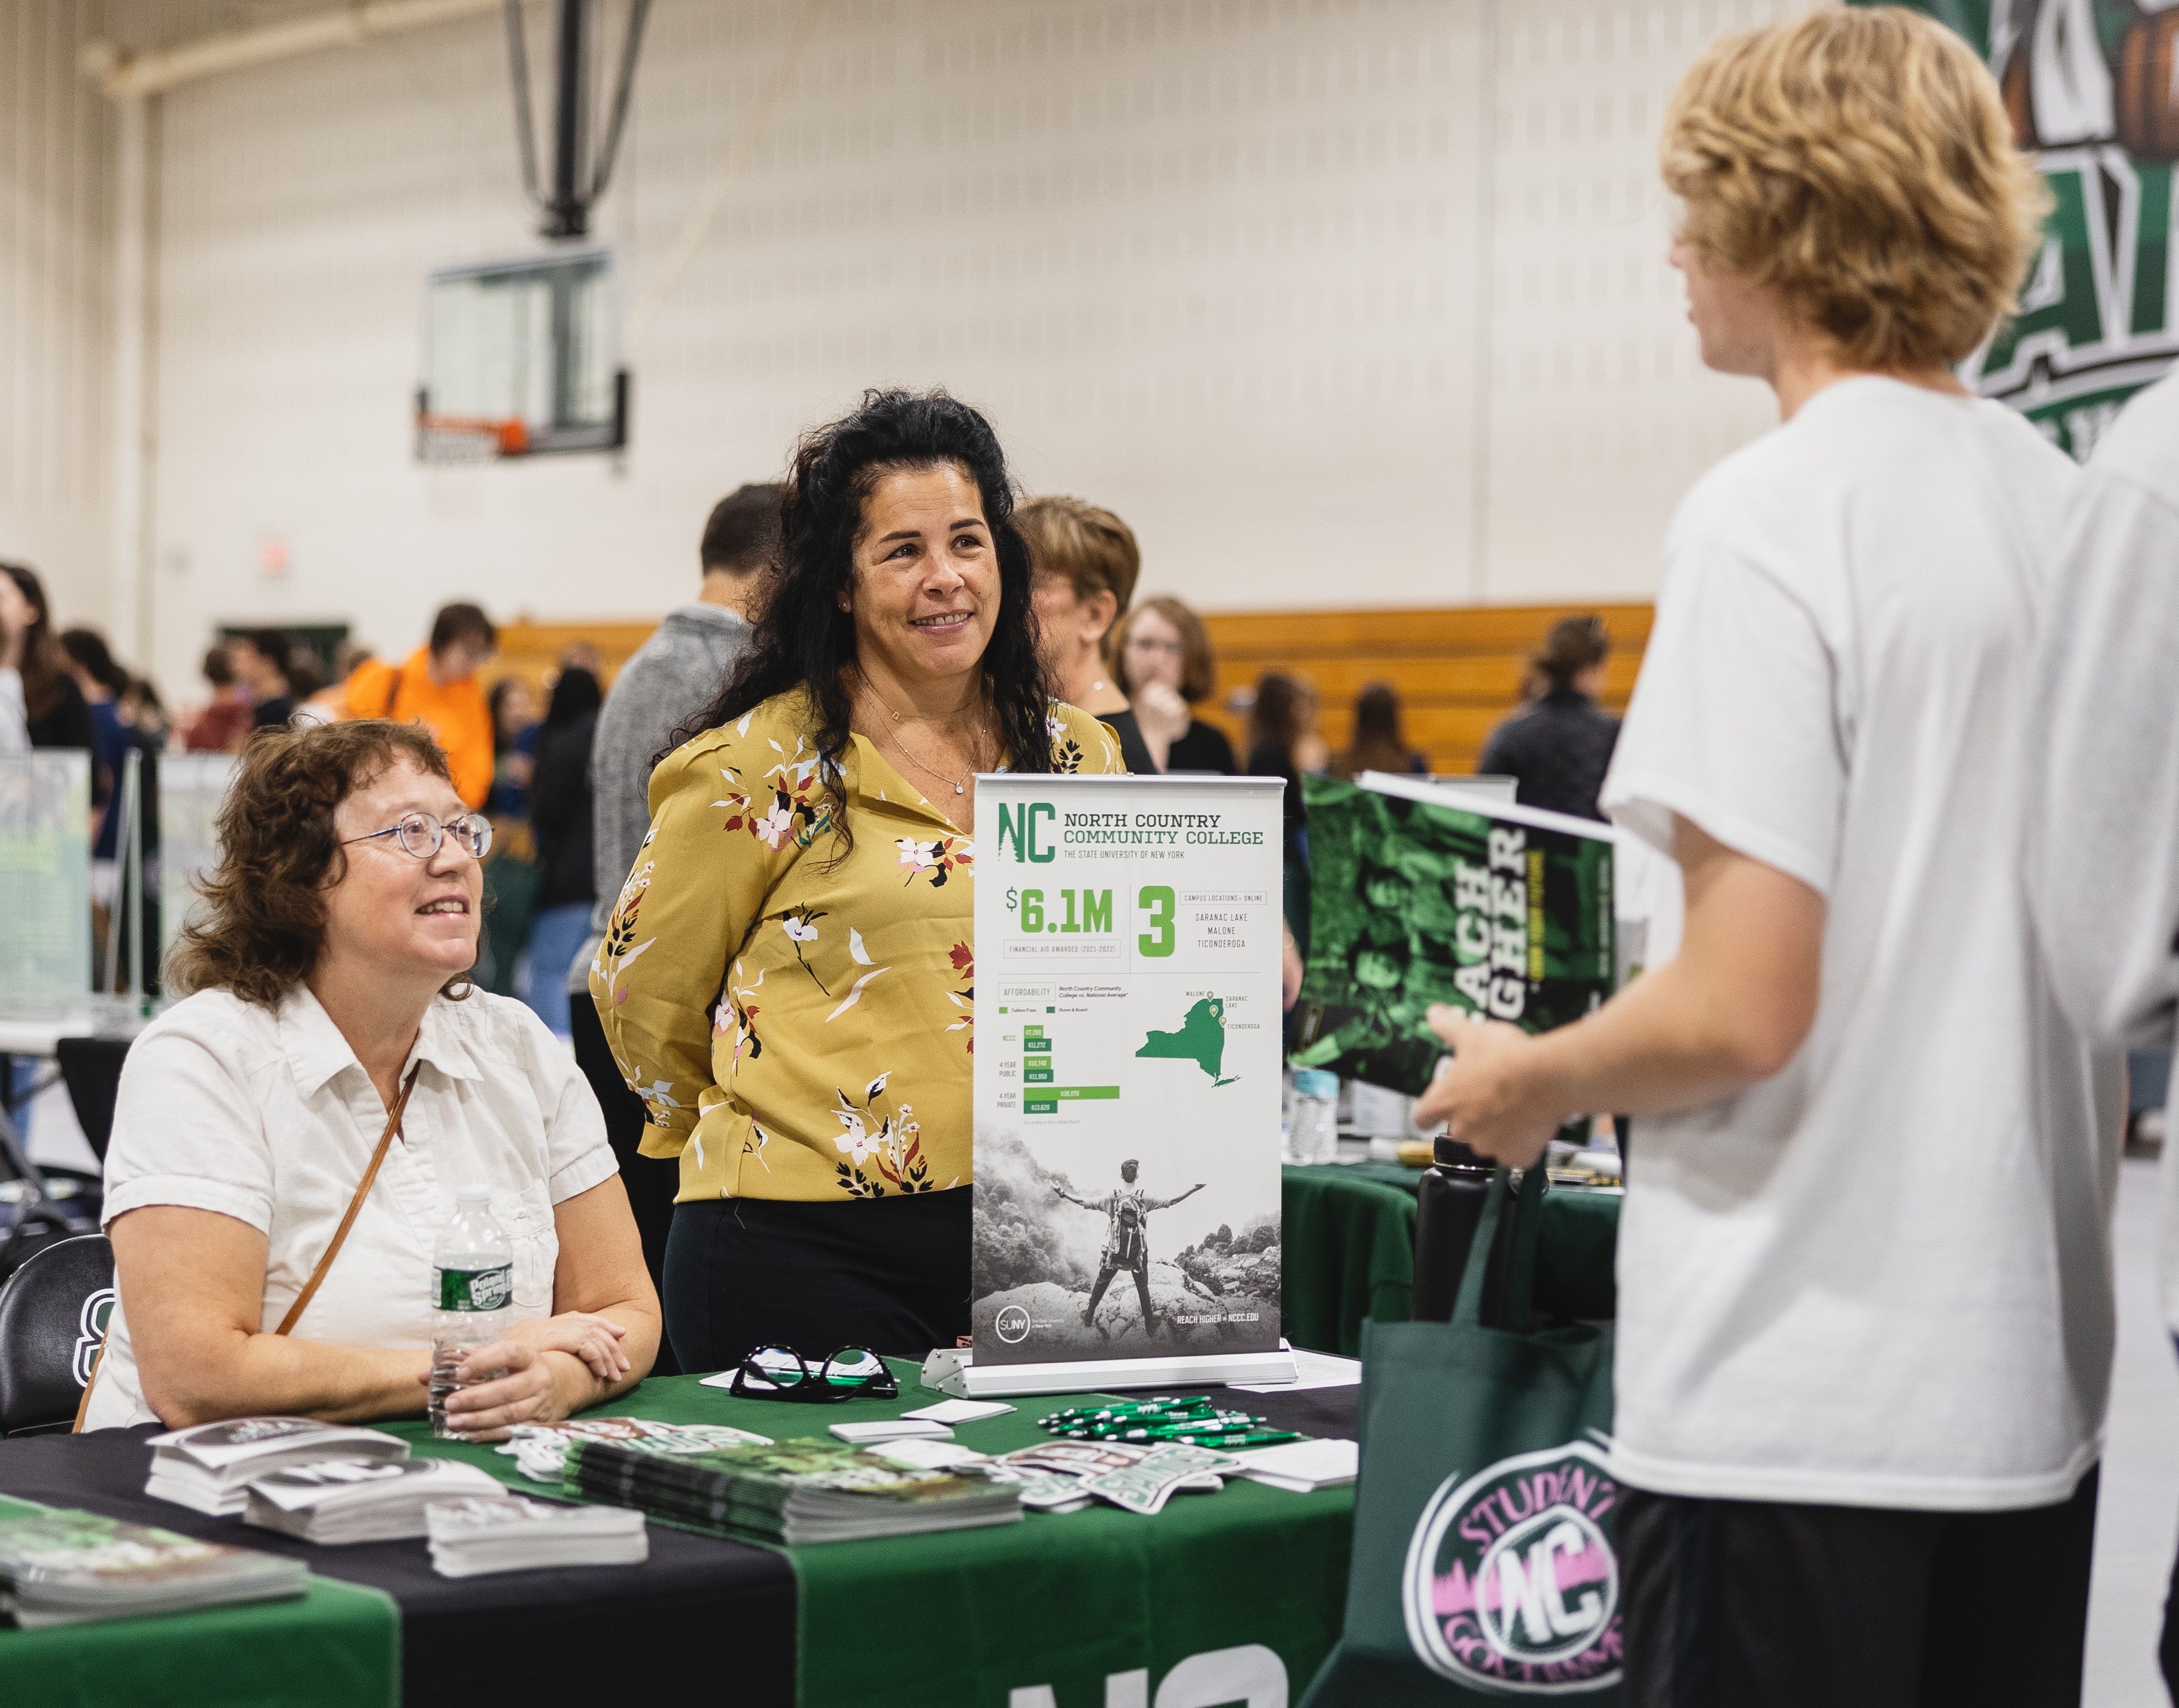 College employees talk with a prospective student.